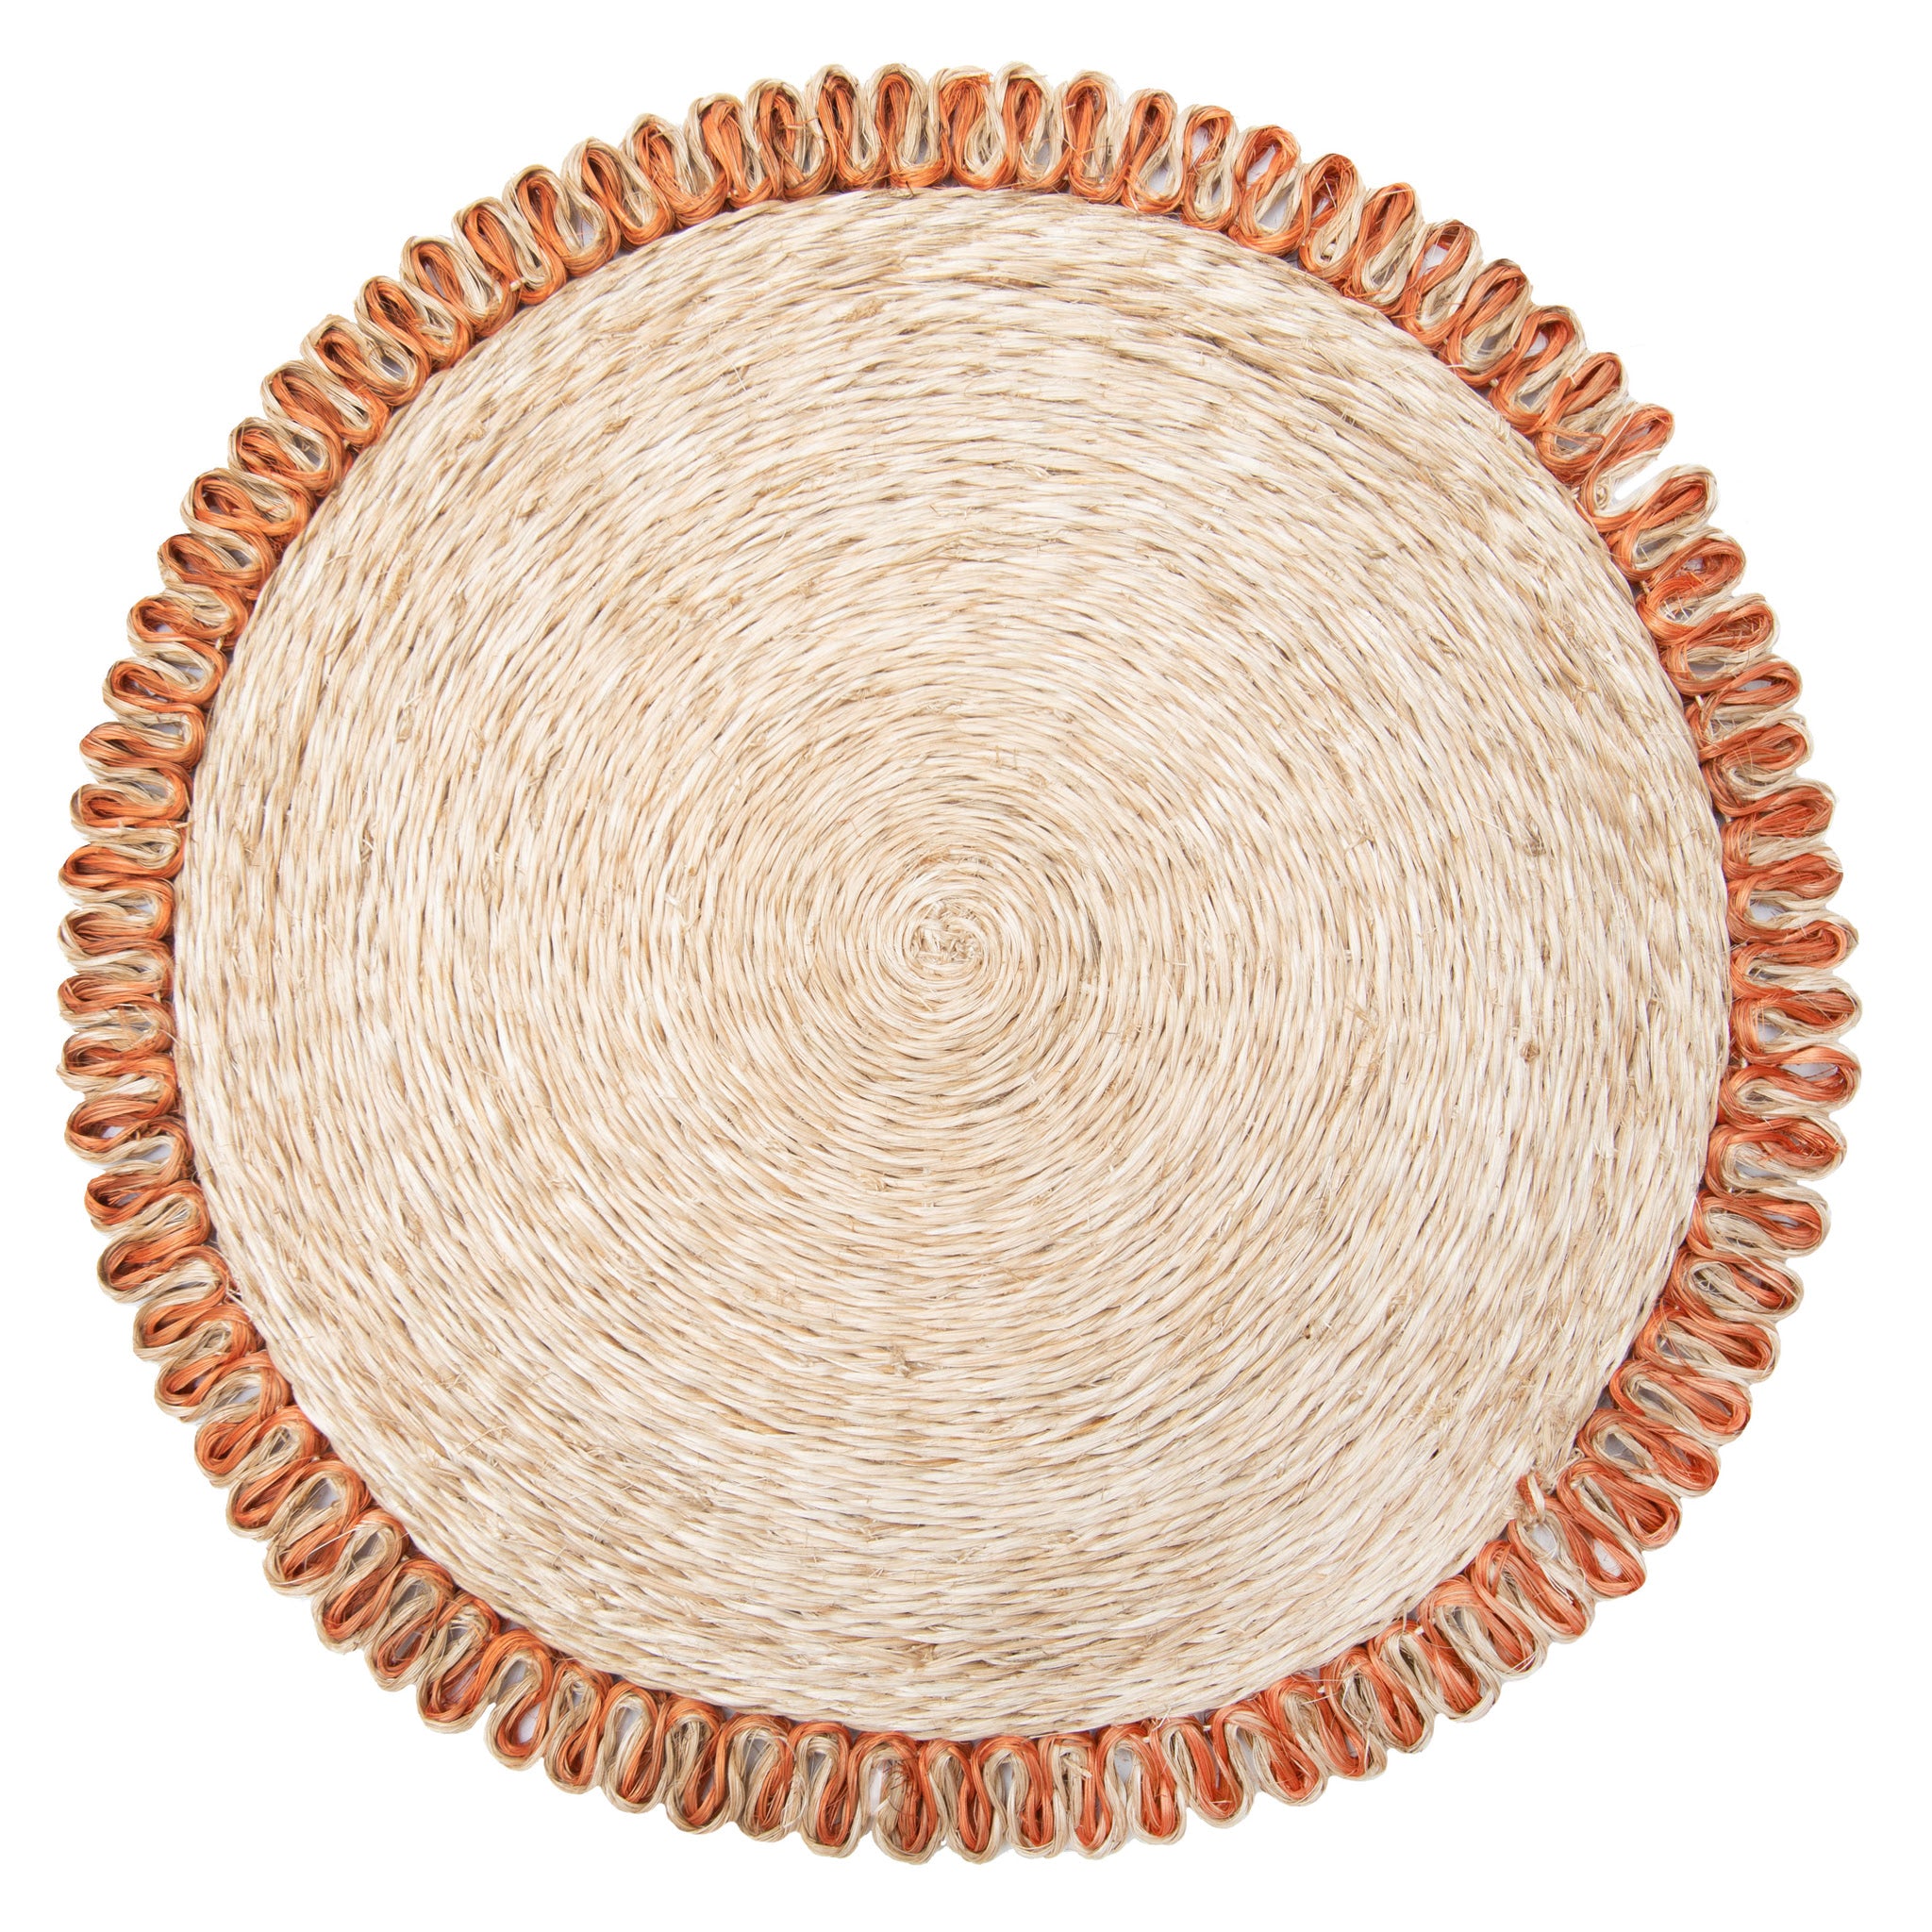 Loopy Abaca 15" Round Placemat - Set of 4